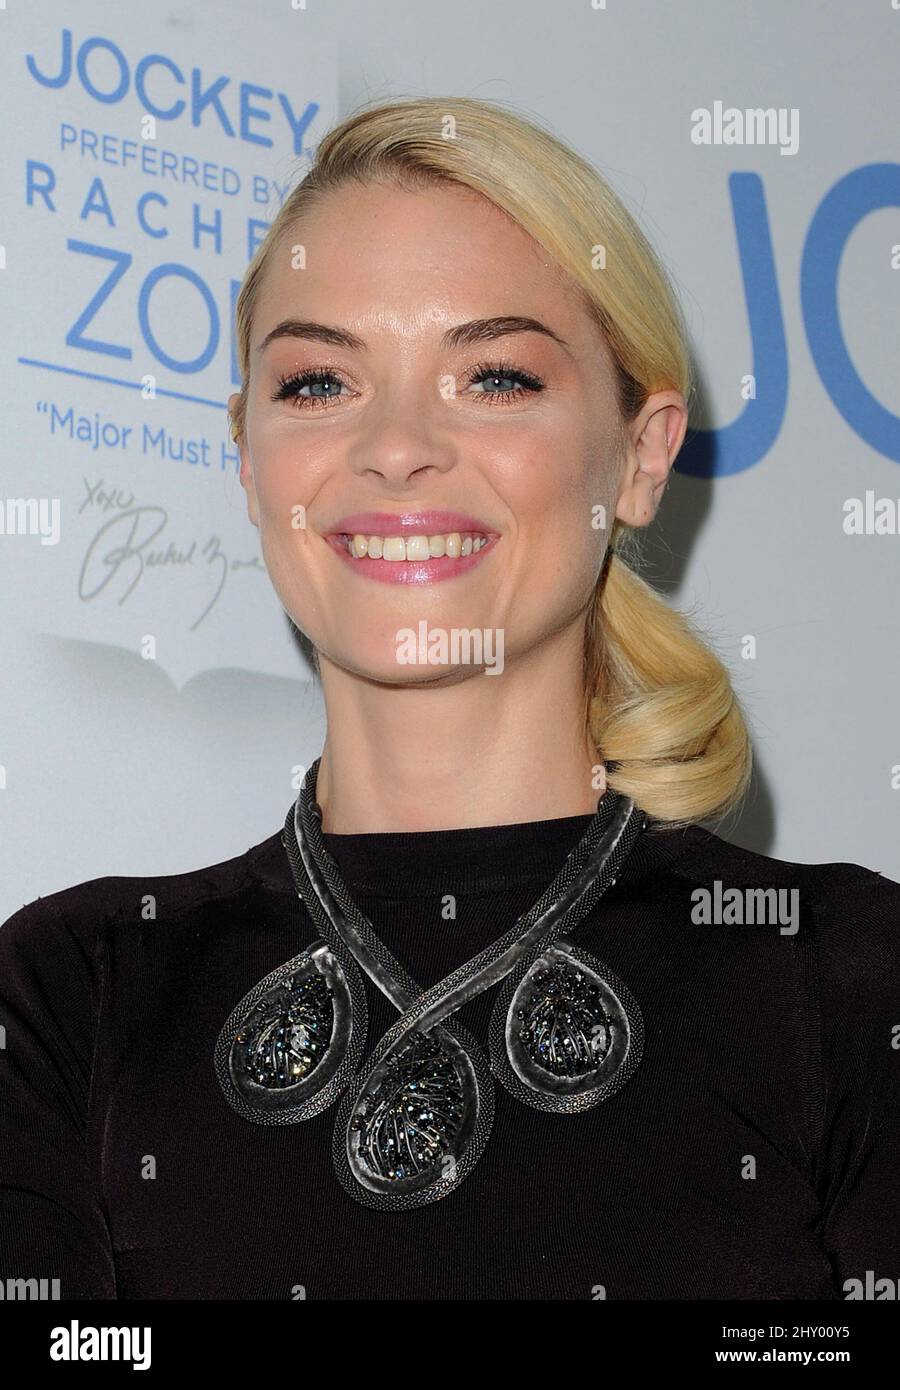 Jaime King attends Rachel Zoe's 'Major Must Haves' from Jockey Launch held at the London Hotel on October 17, 2012 Los Angeles, Ca. Stock Photo